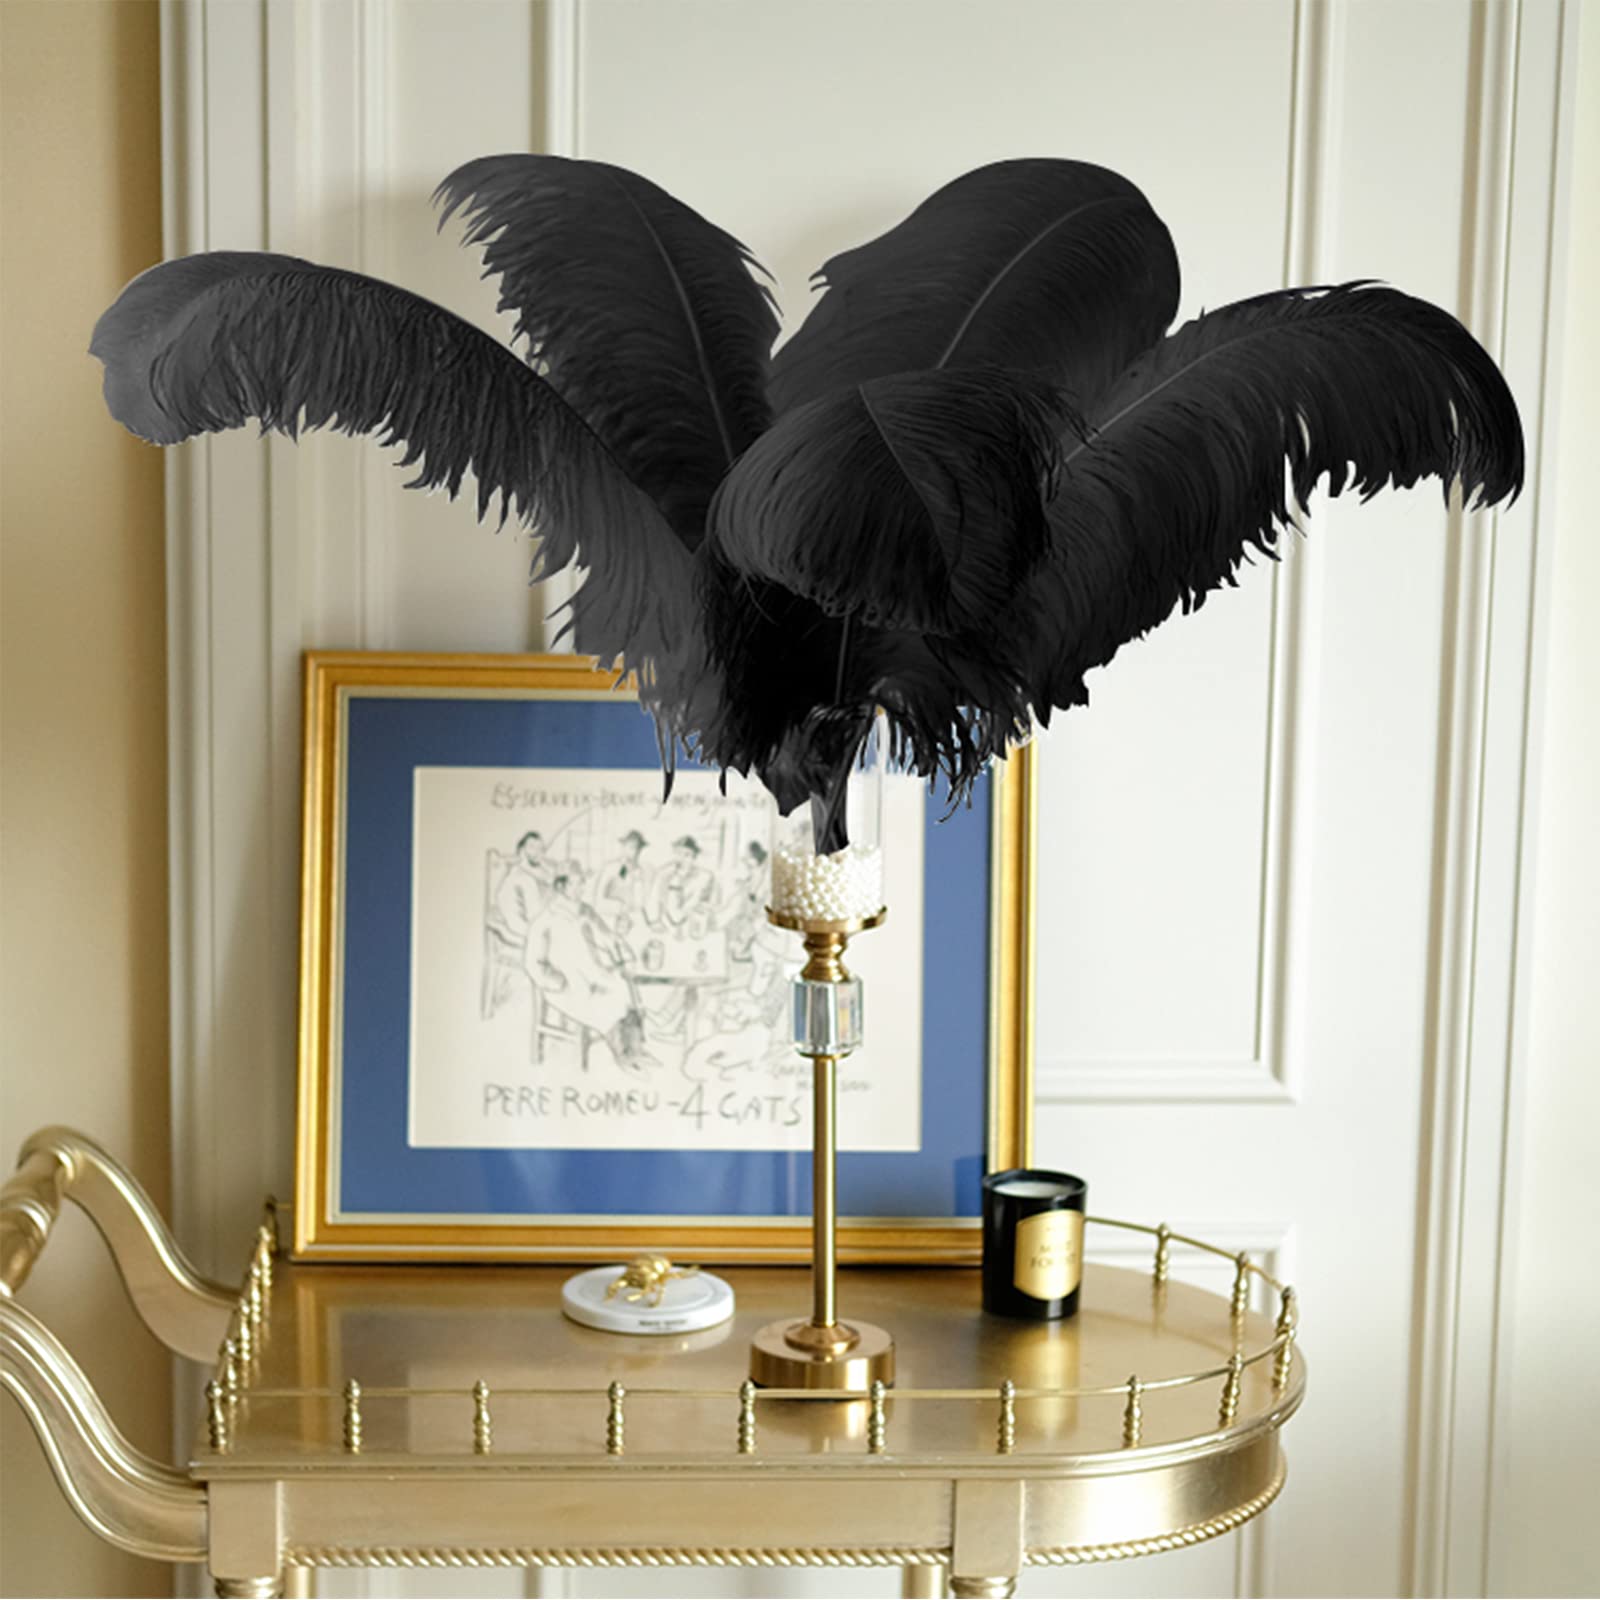 EVNNO Evnno 10 Pcs Natural Black Ostrich Feathers Making Kit,27-29 In Large  Ostrich Feathers Bulk For Wedding Party Centerpieces And V